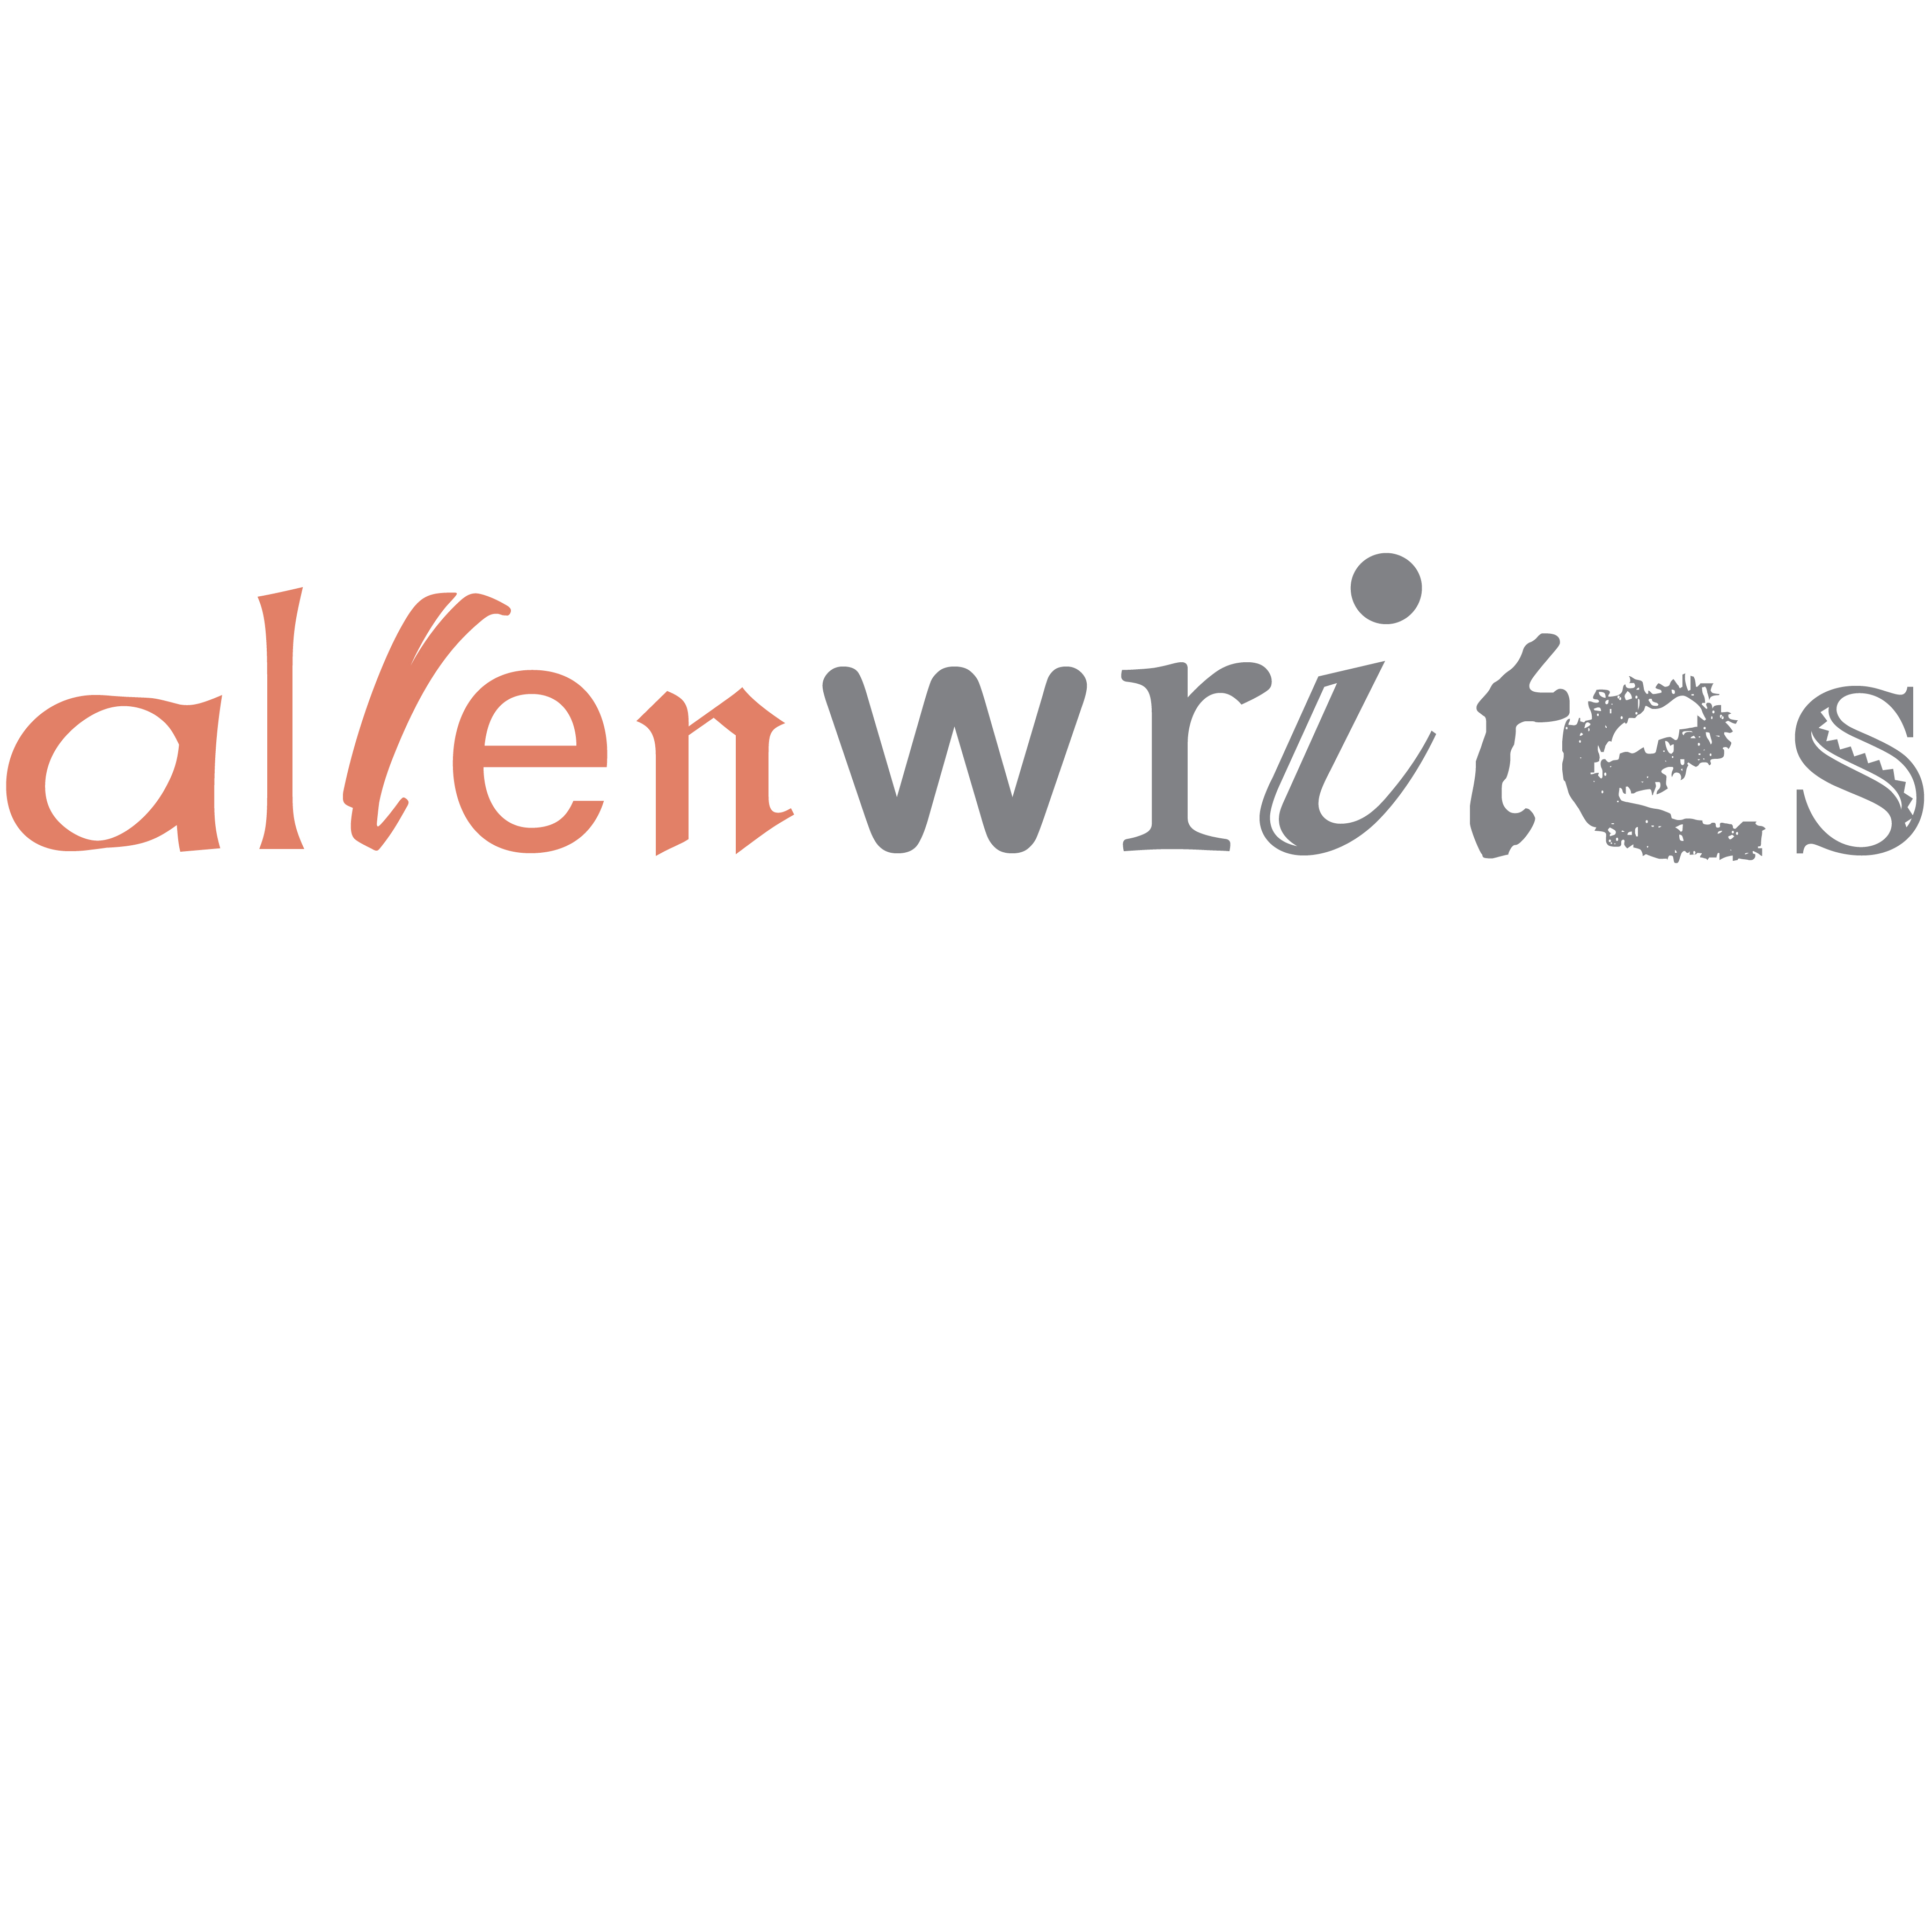 AllenWritesC logo design by logo designer Mireles+Design for your inspiration and for the worlds largest logo competition